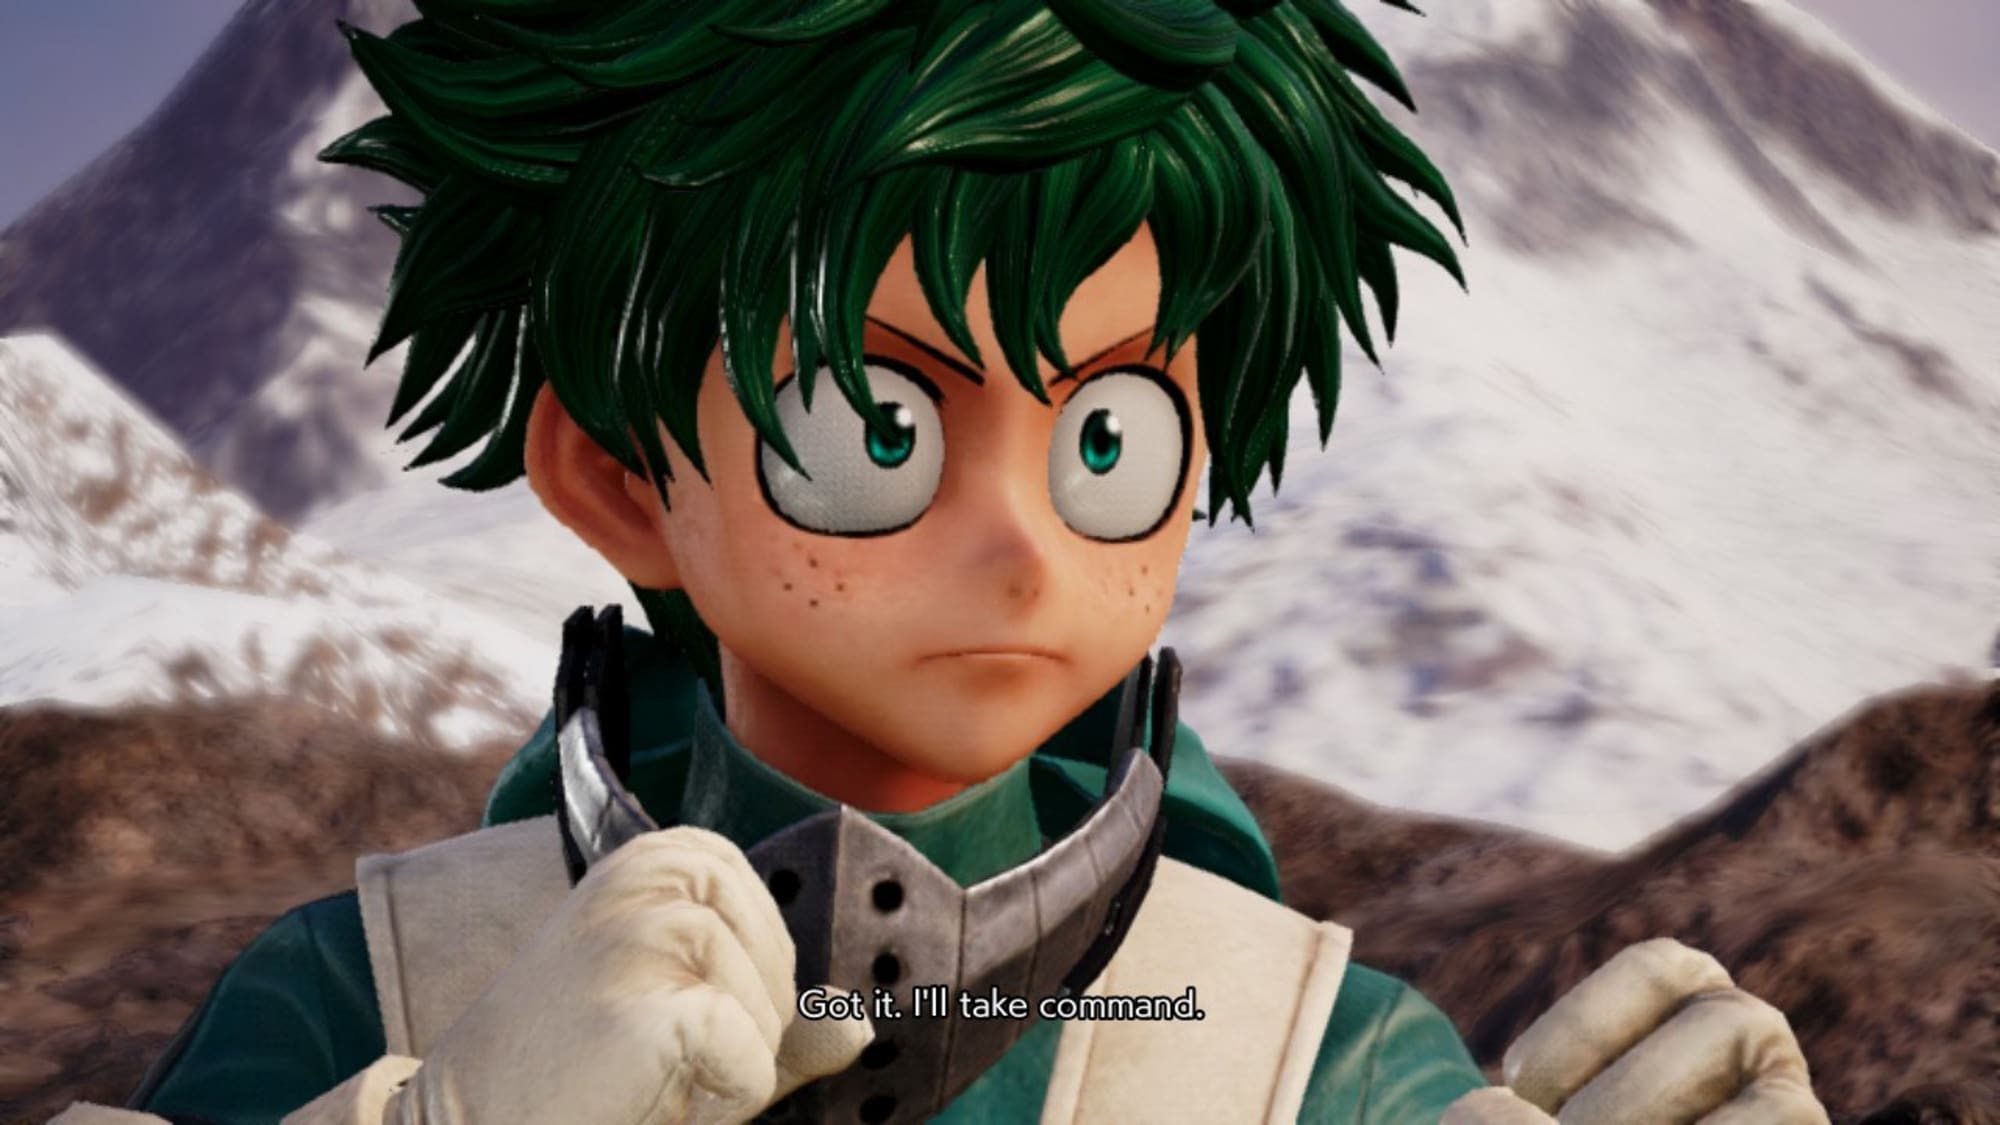 switch jump force review